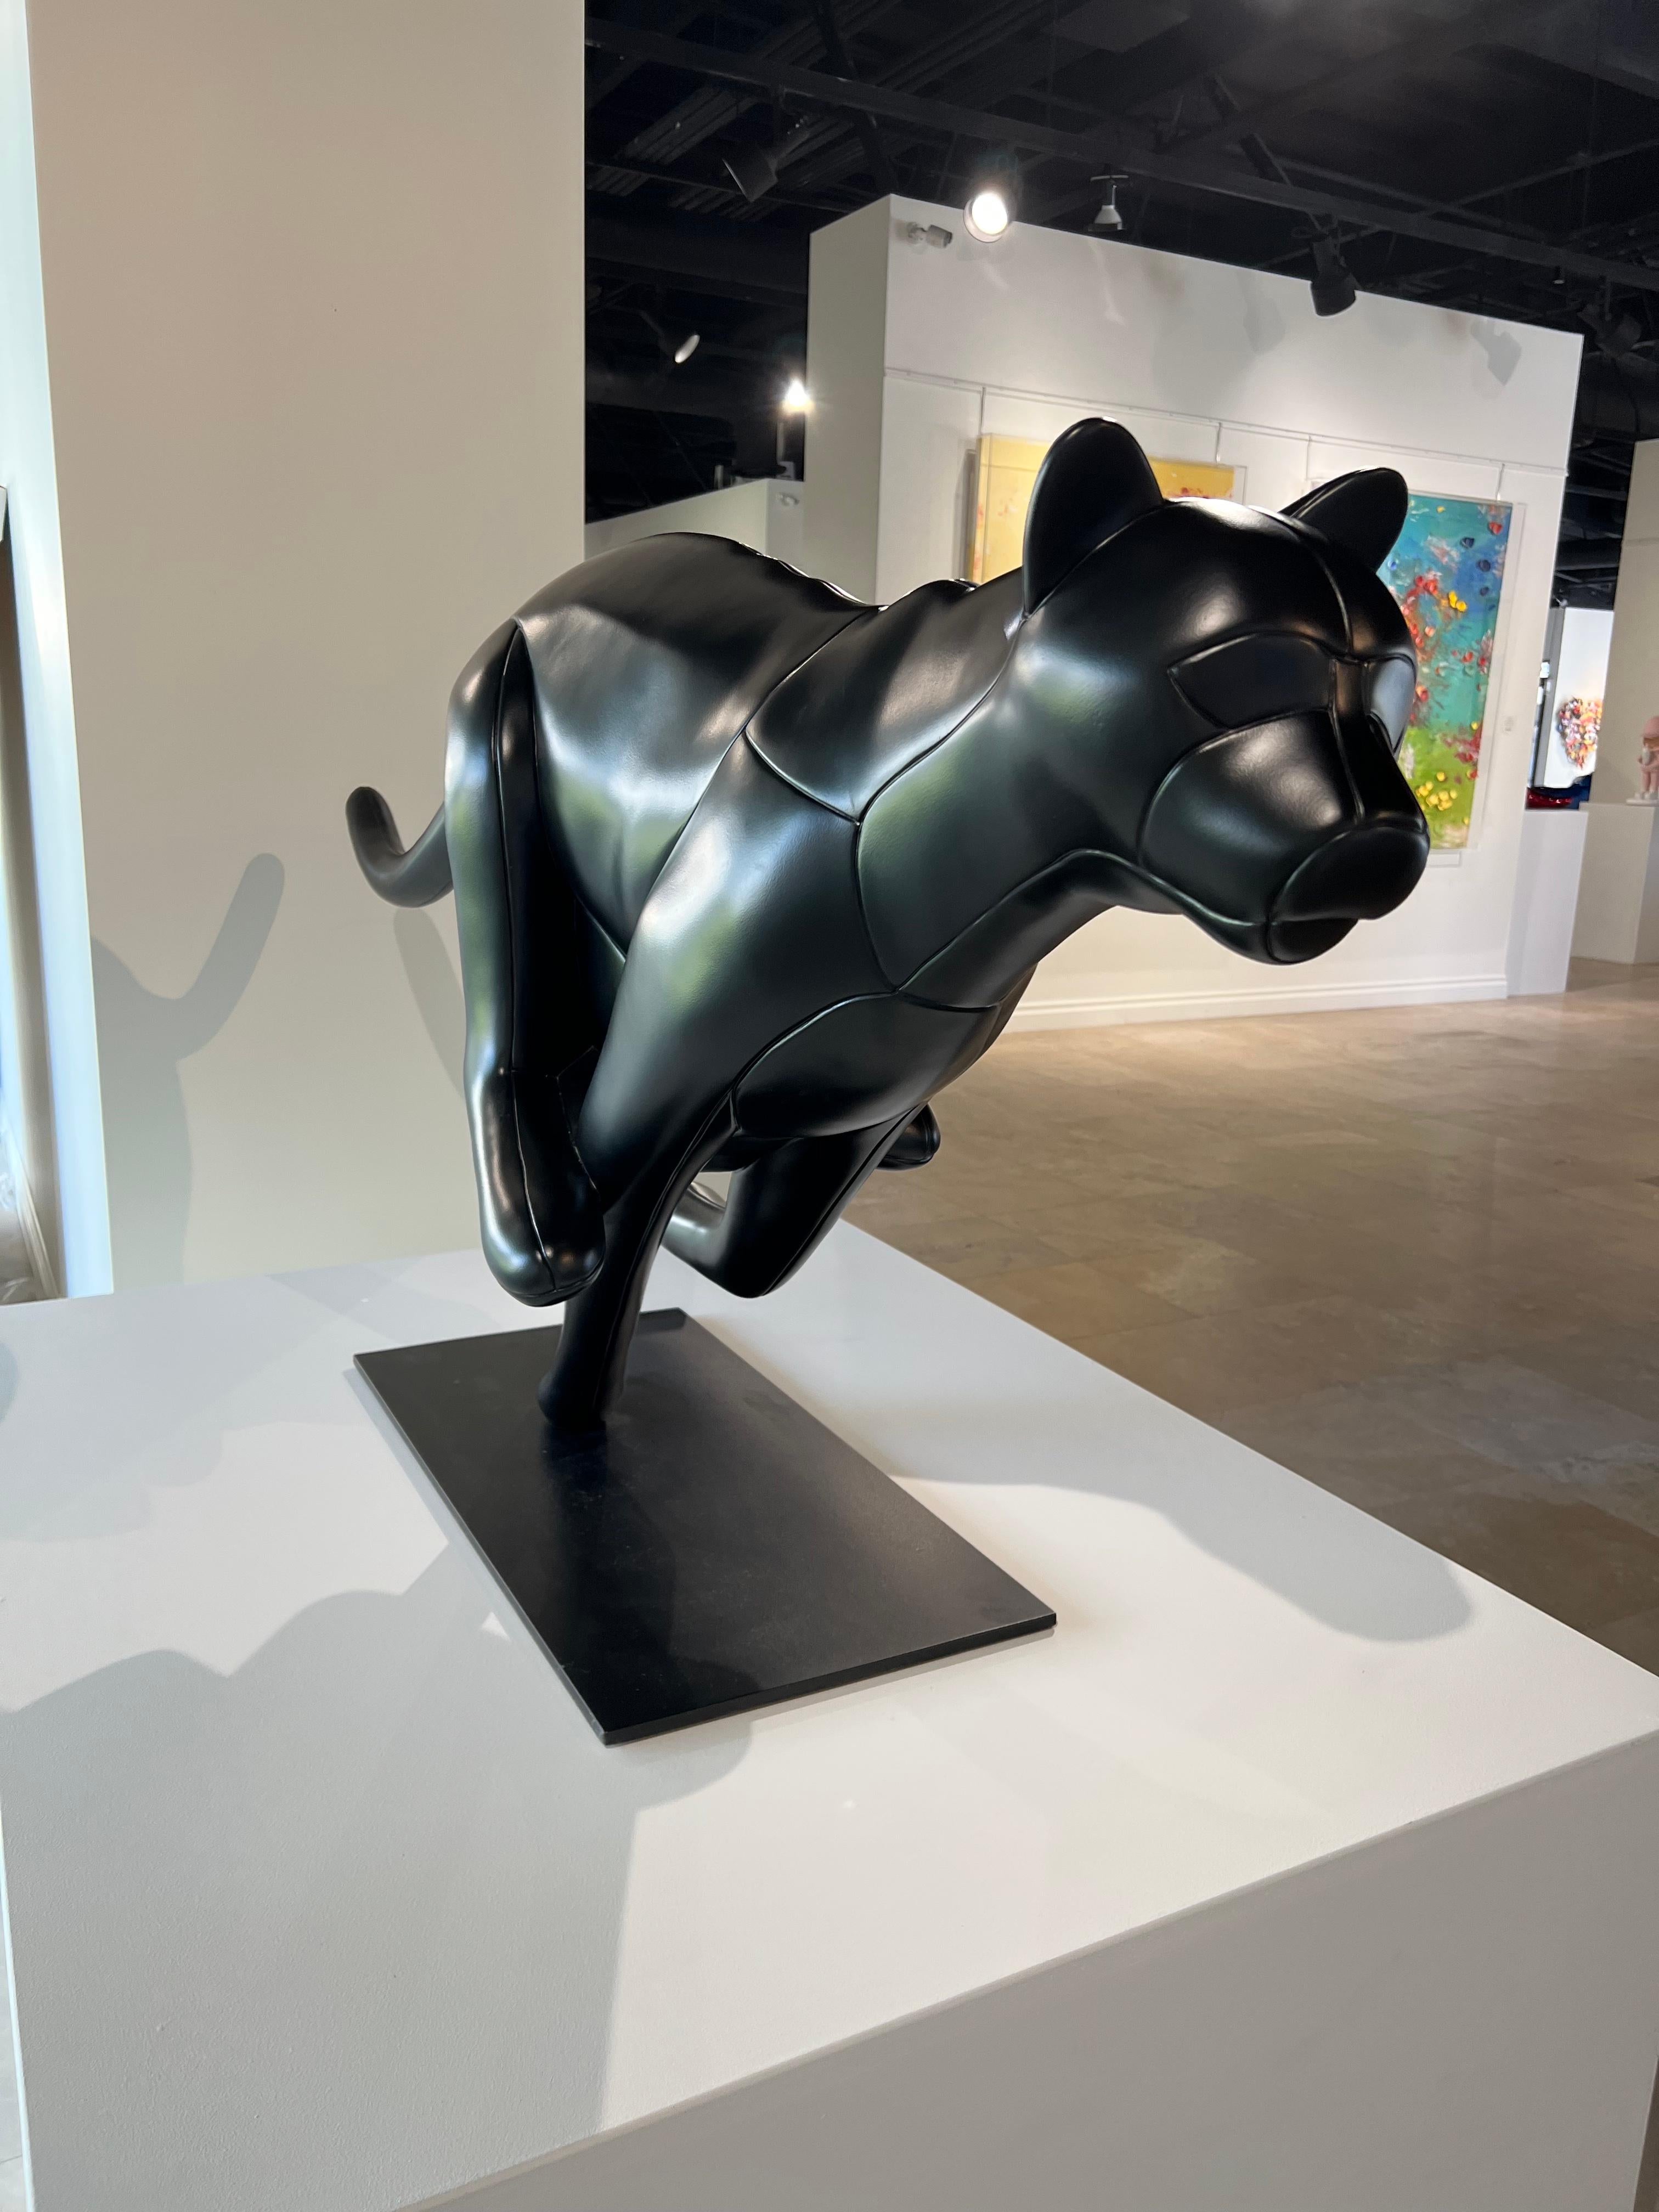 Christopher Schulz is a sculptor born in California in 1974. Recognized for his metalwork sculptures' minimalist, streamlined style, Schulz portrays subjects such as sharks, elephants, and motorcycles. He works primarily in chromed stainless steel